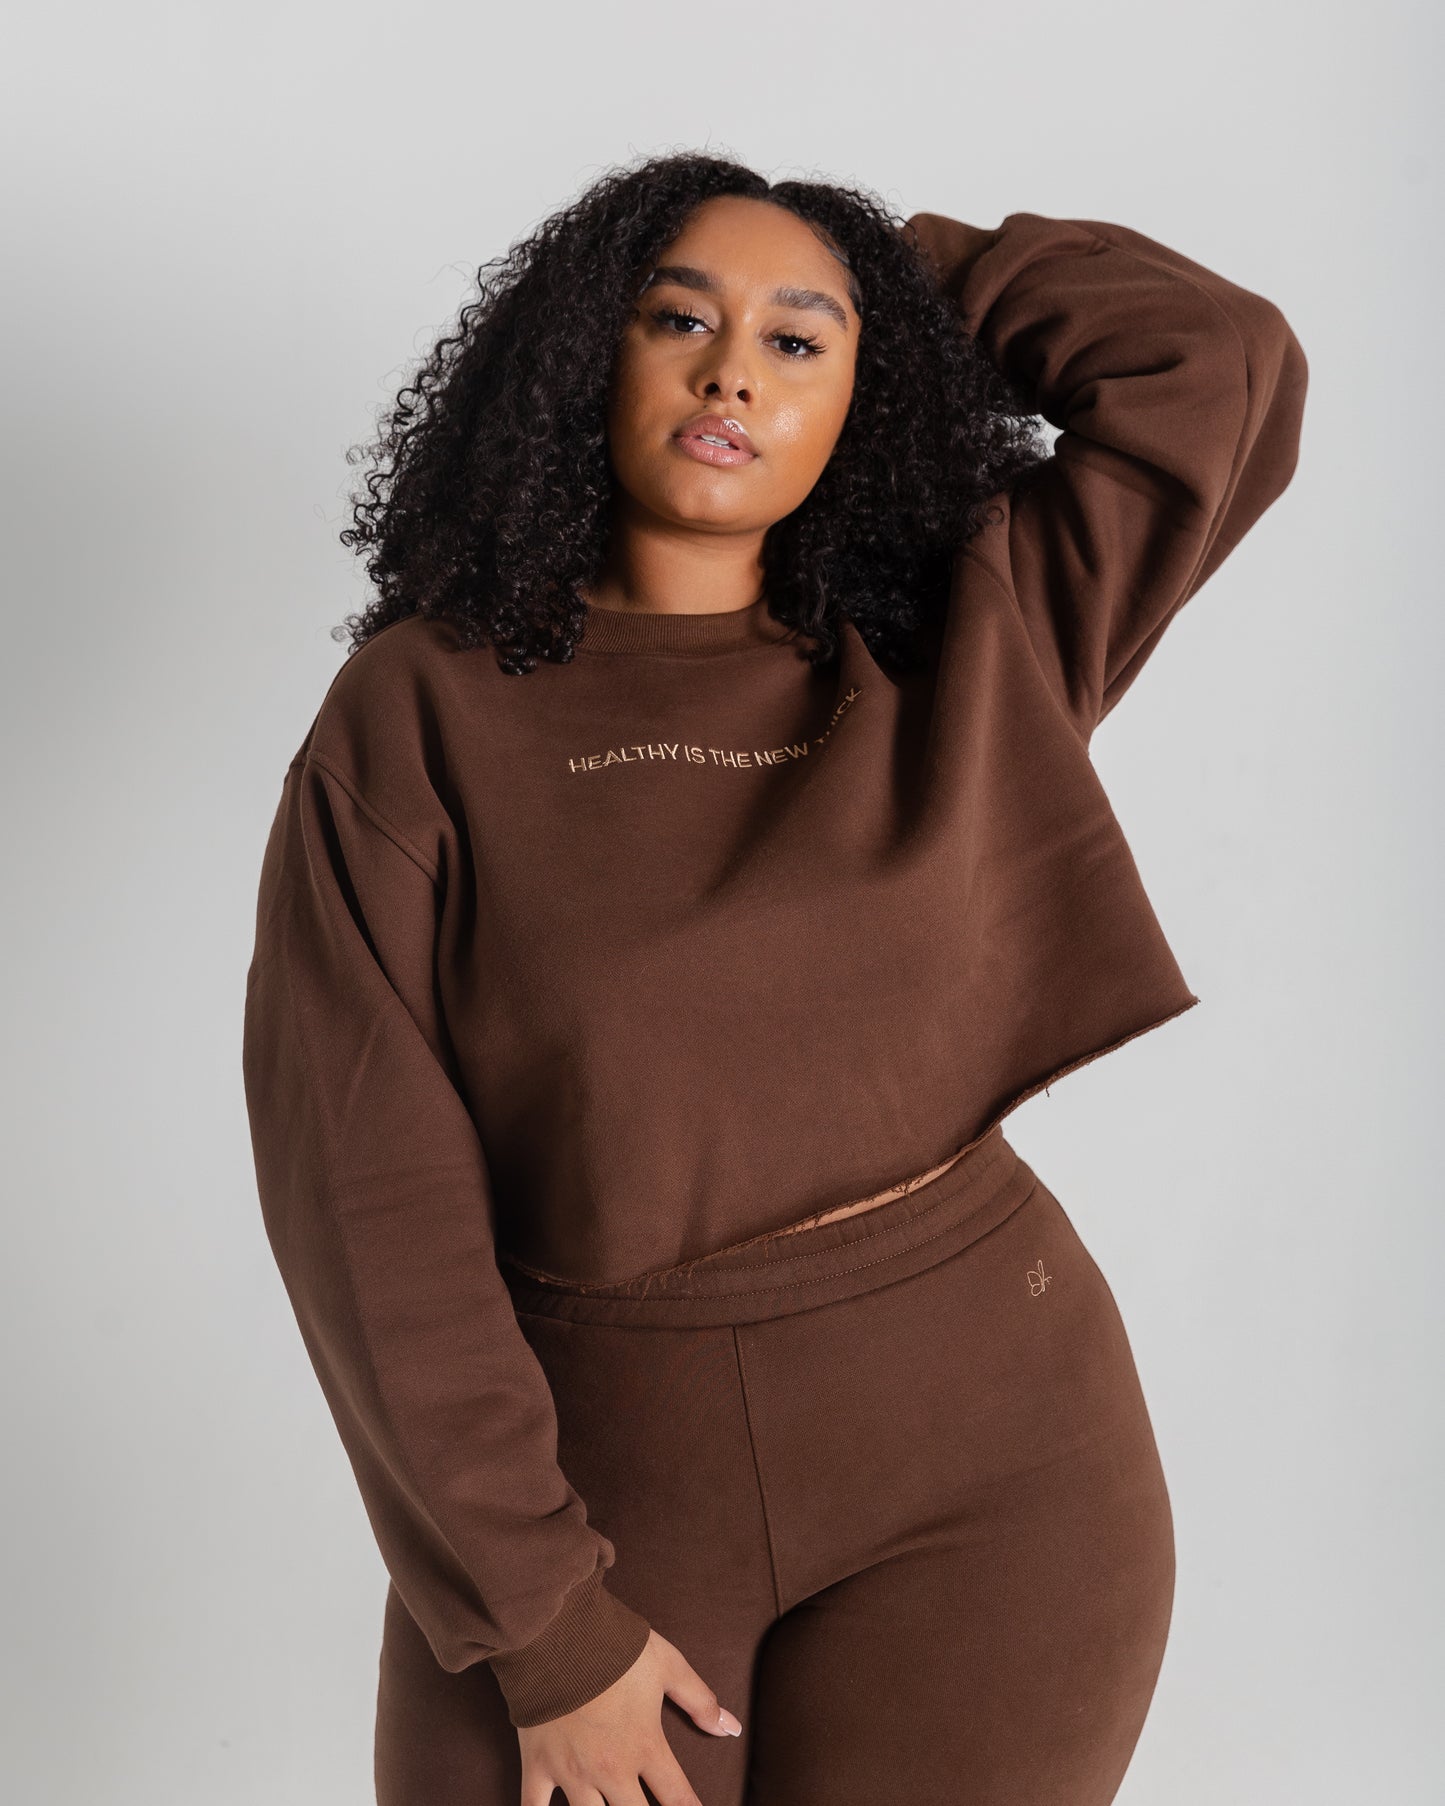 Healthy Is The New Thick Sweatshirt | Confidence